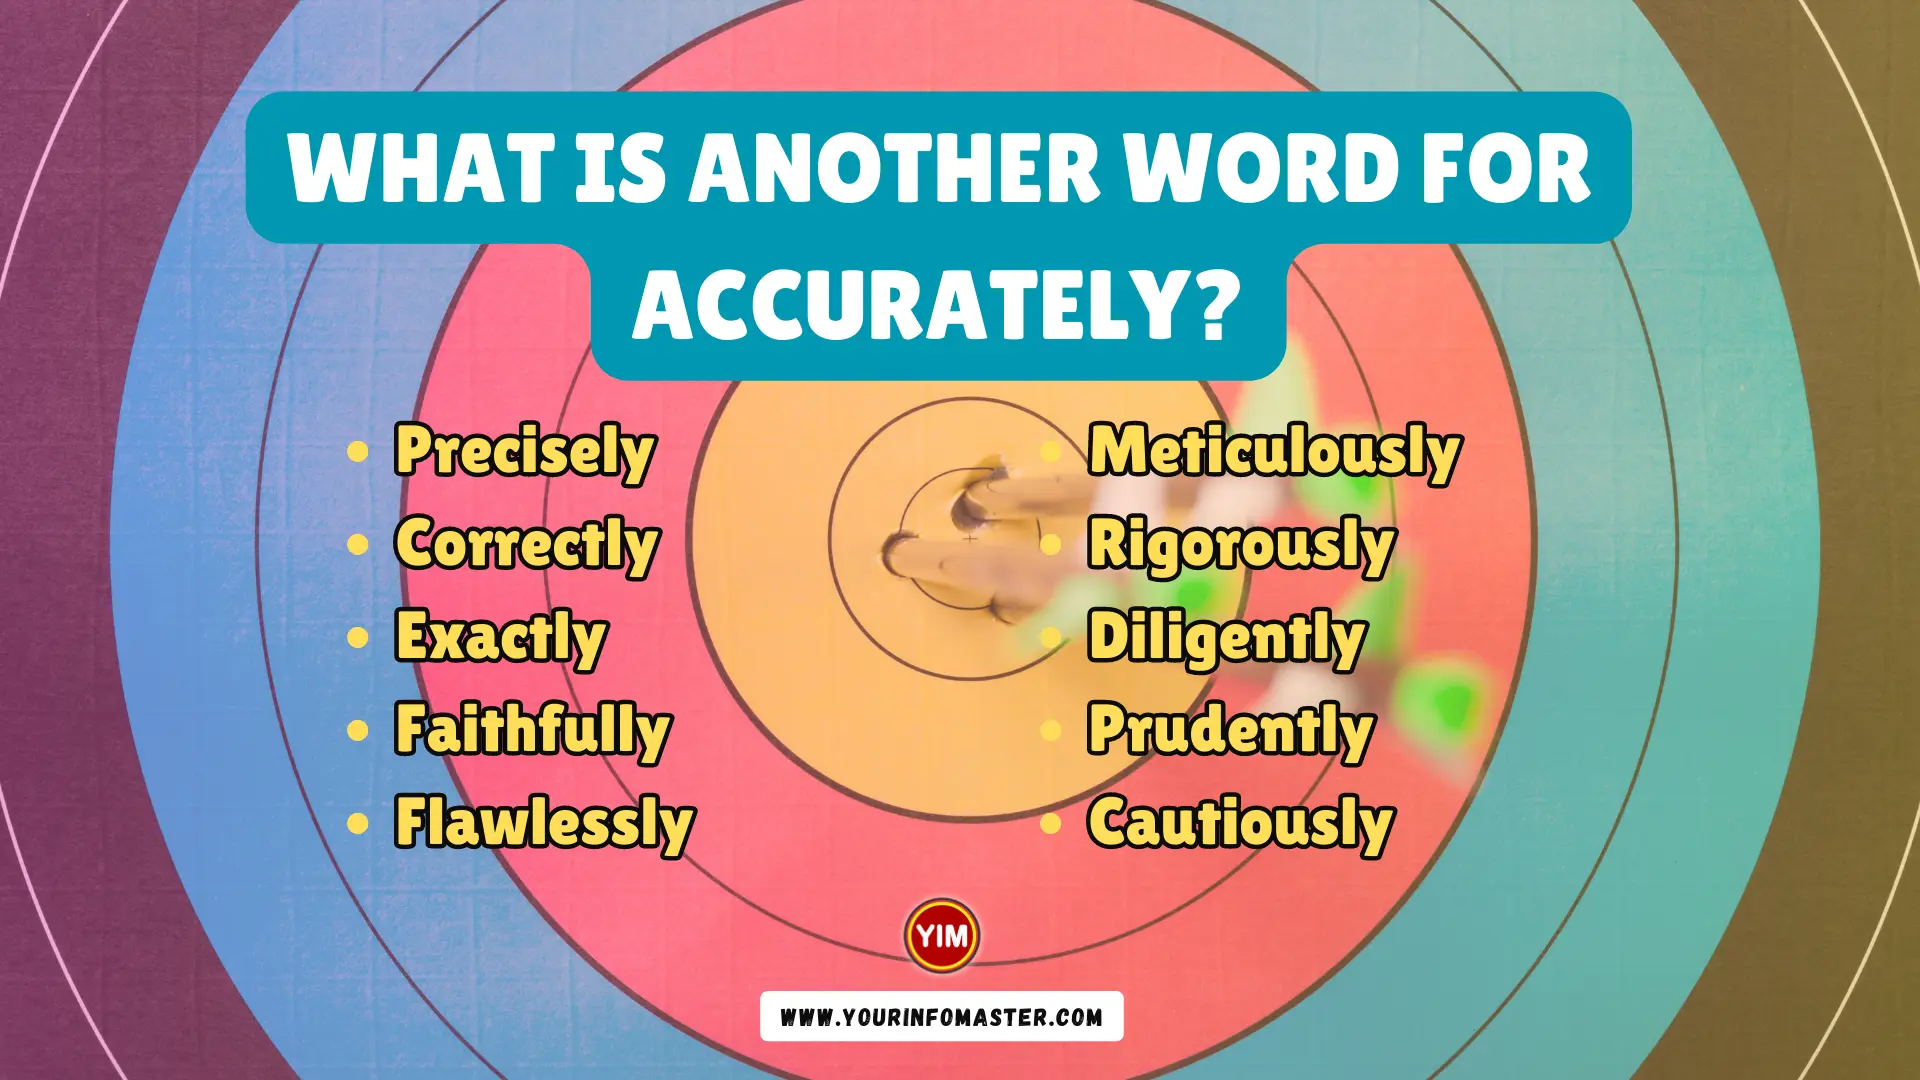 What is another word for Accurately